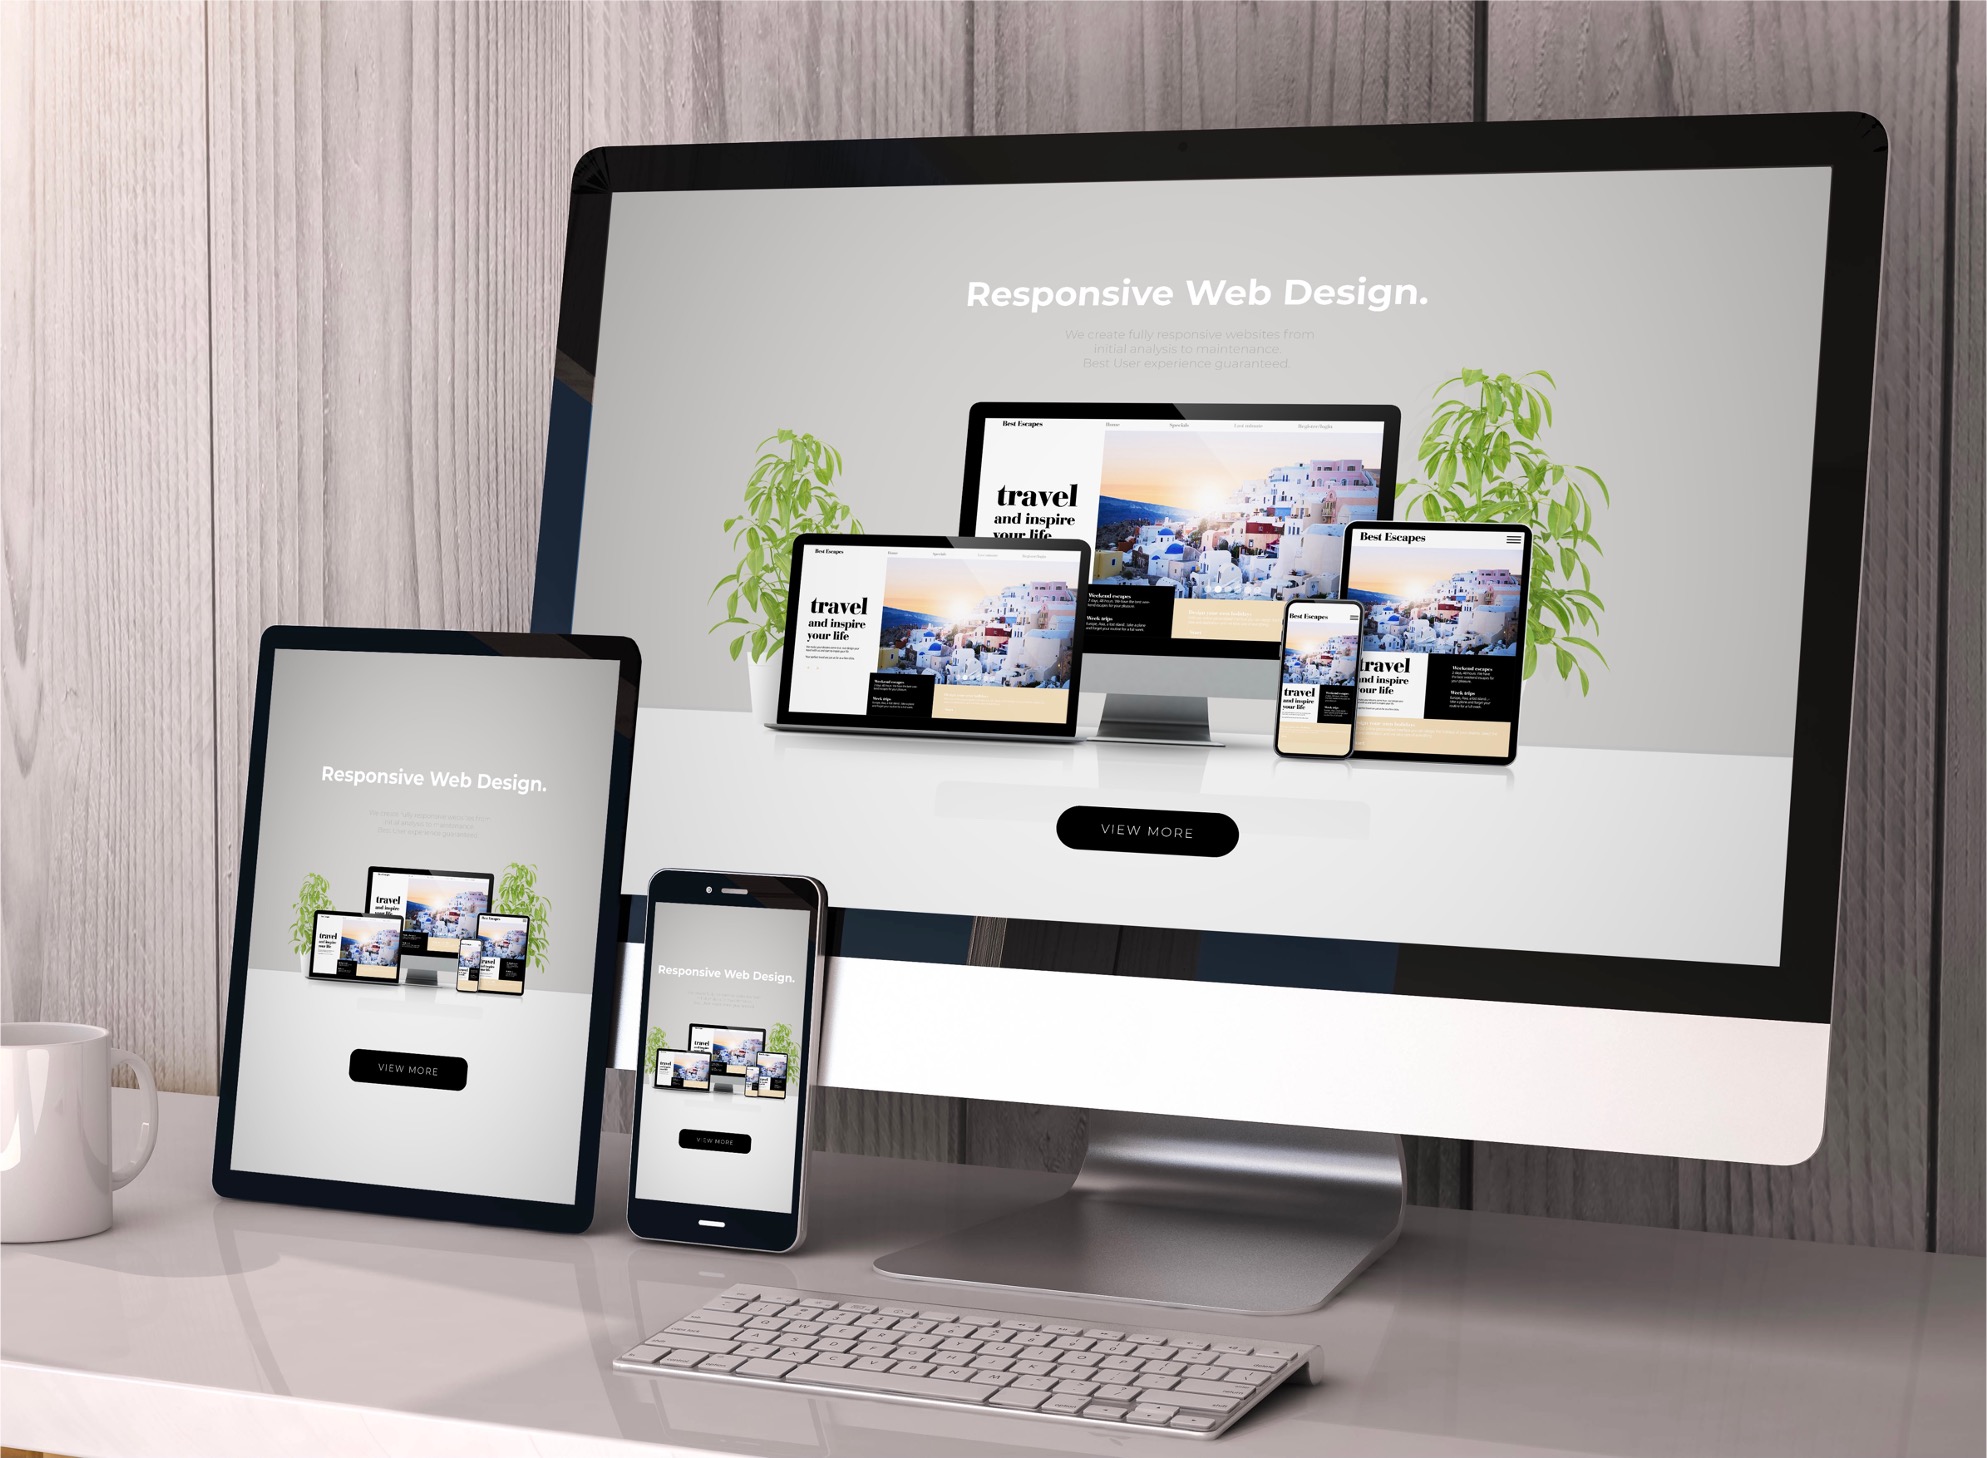 Responsive websites that are easy to build and maintain